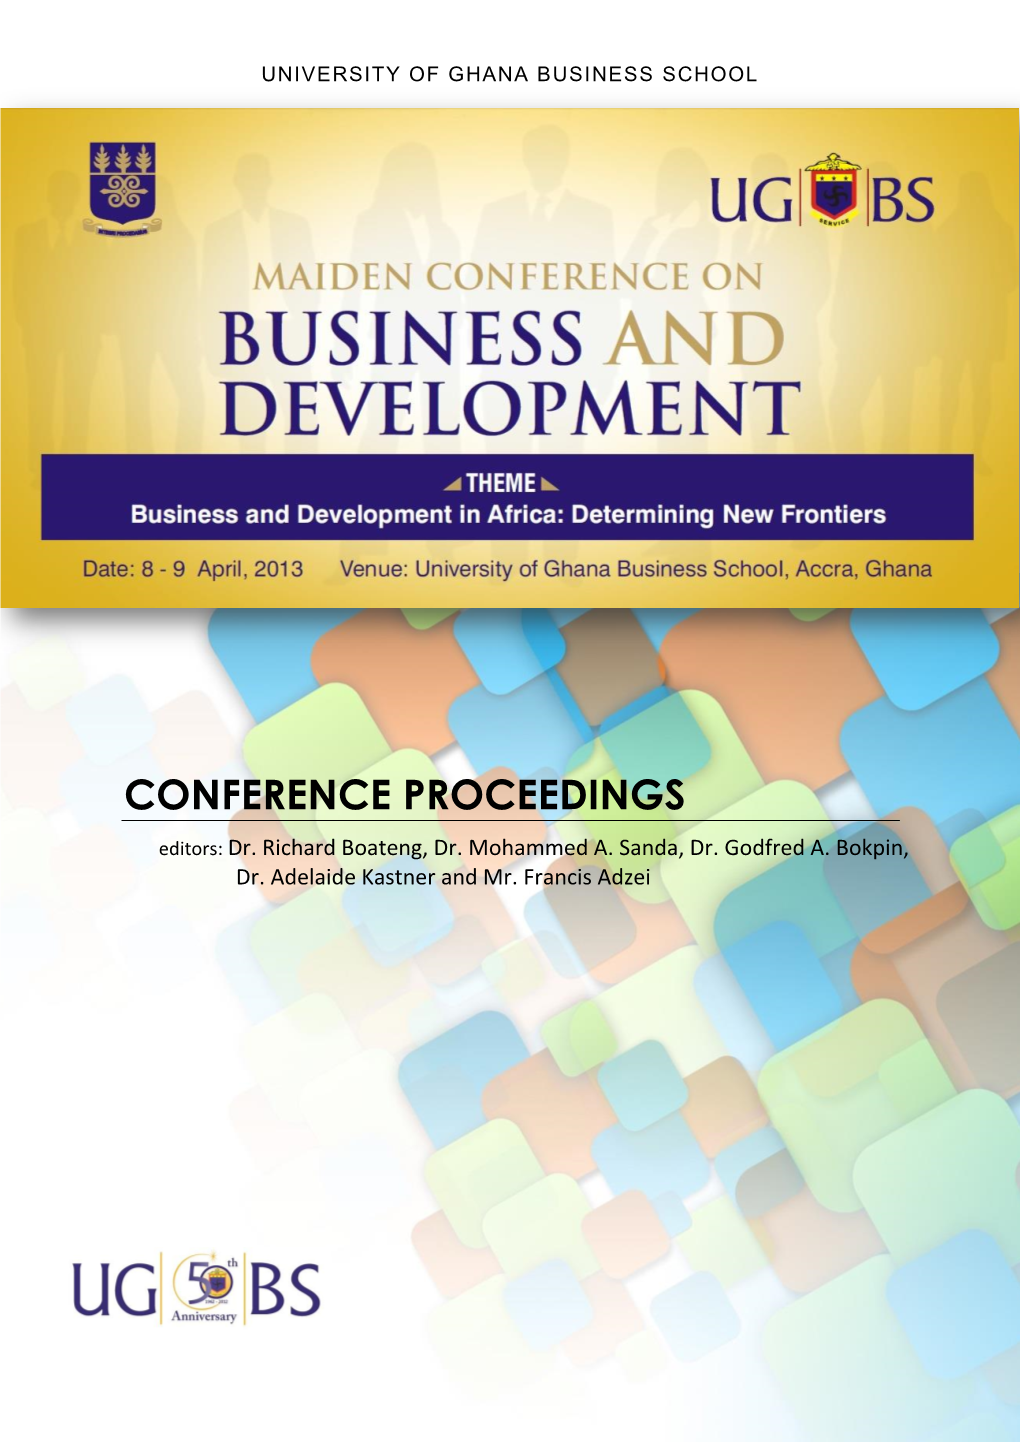 CONFERENCE PROCEEDINGS Editors: Dr